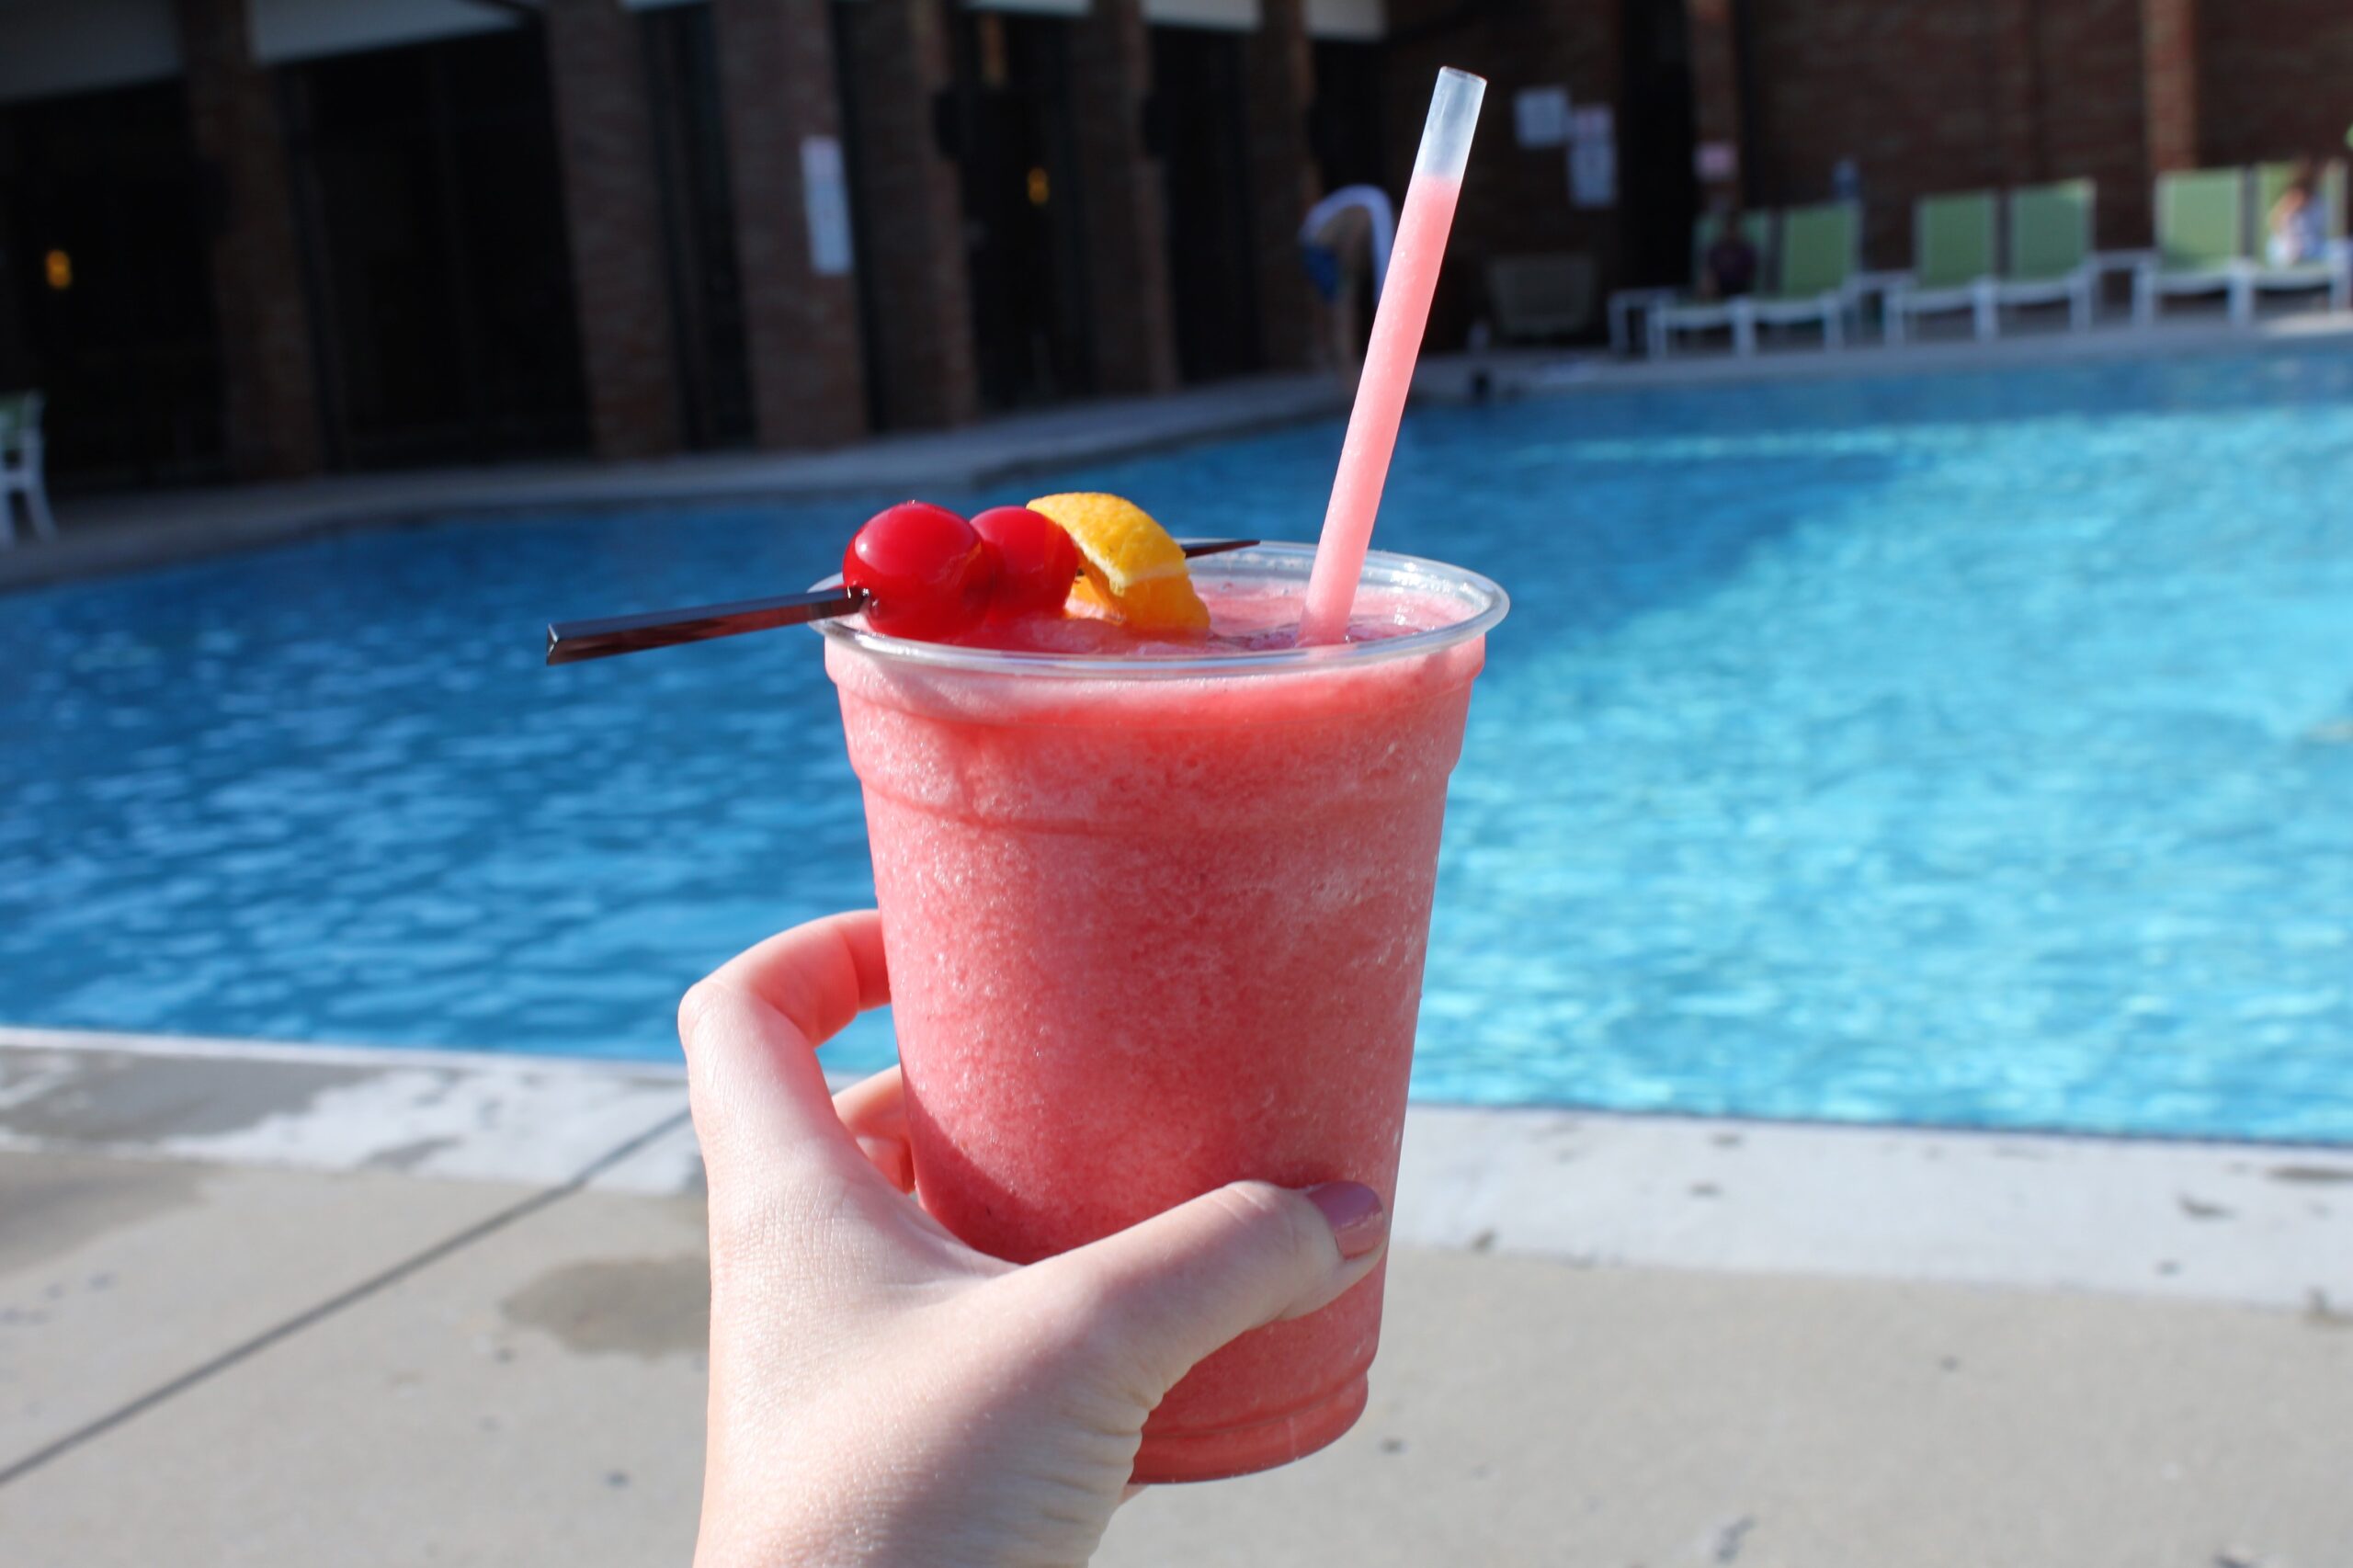 poolside at lincolnshire marriott resort staycation